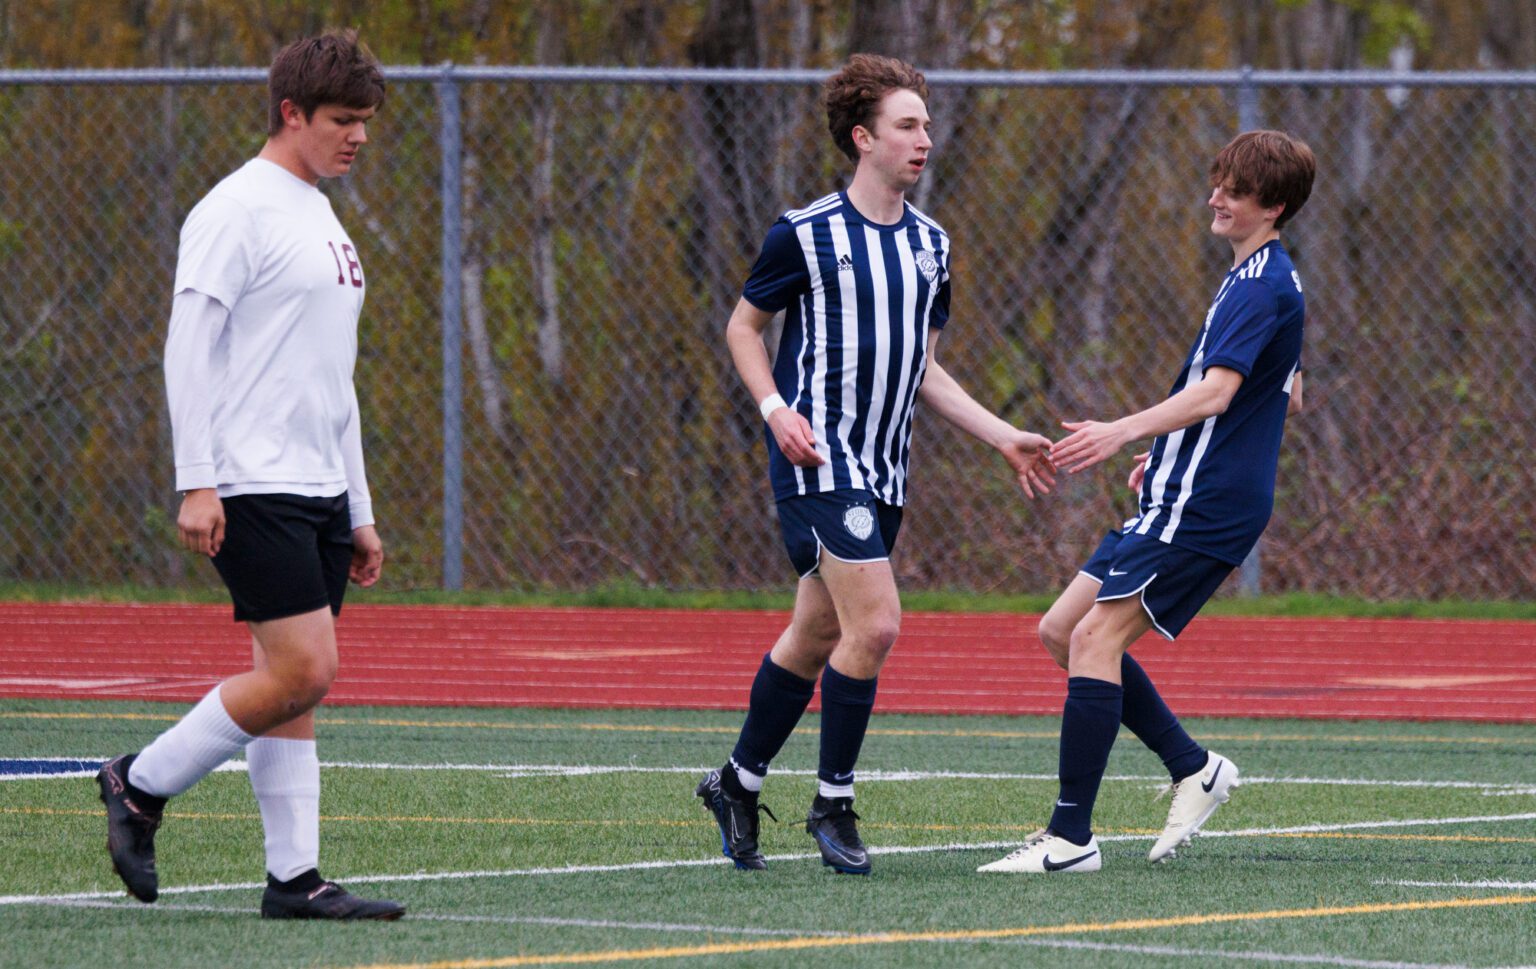 Squalicum's Simon Egner, center, gets a hand from teammate Kellen Savage Thursday, April 11 after scoring a goal as the Storm beat Lakewood 7-1 at Squalicum High School.